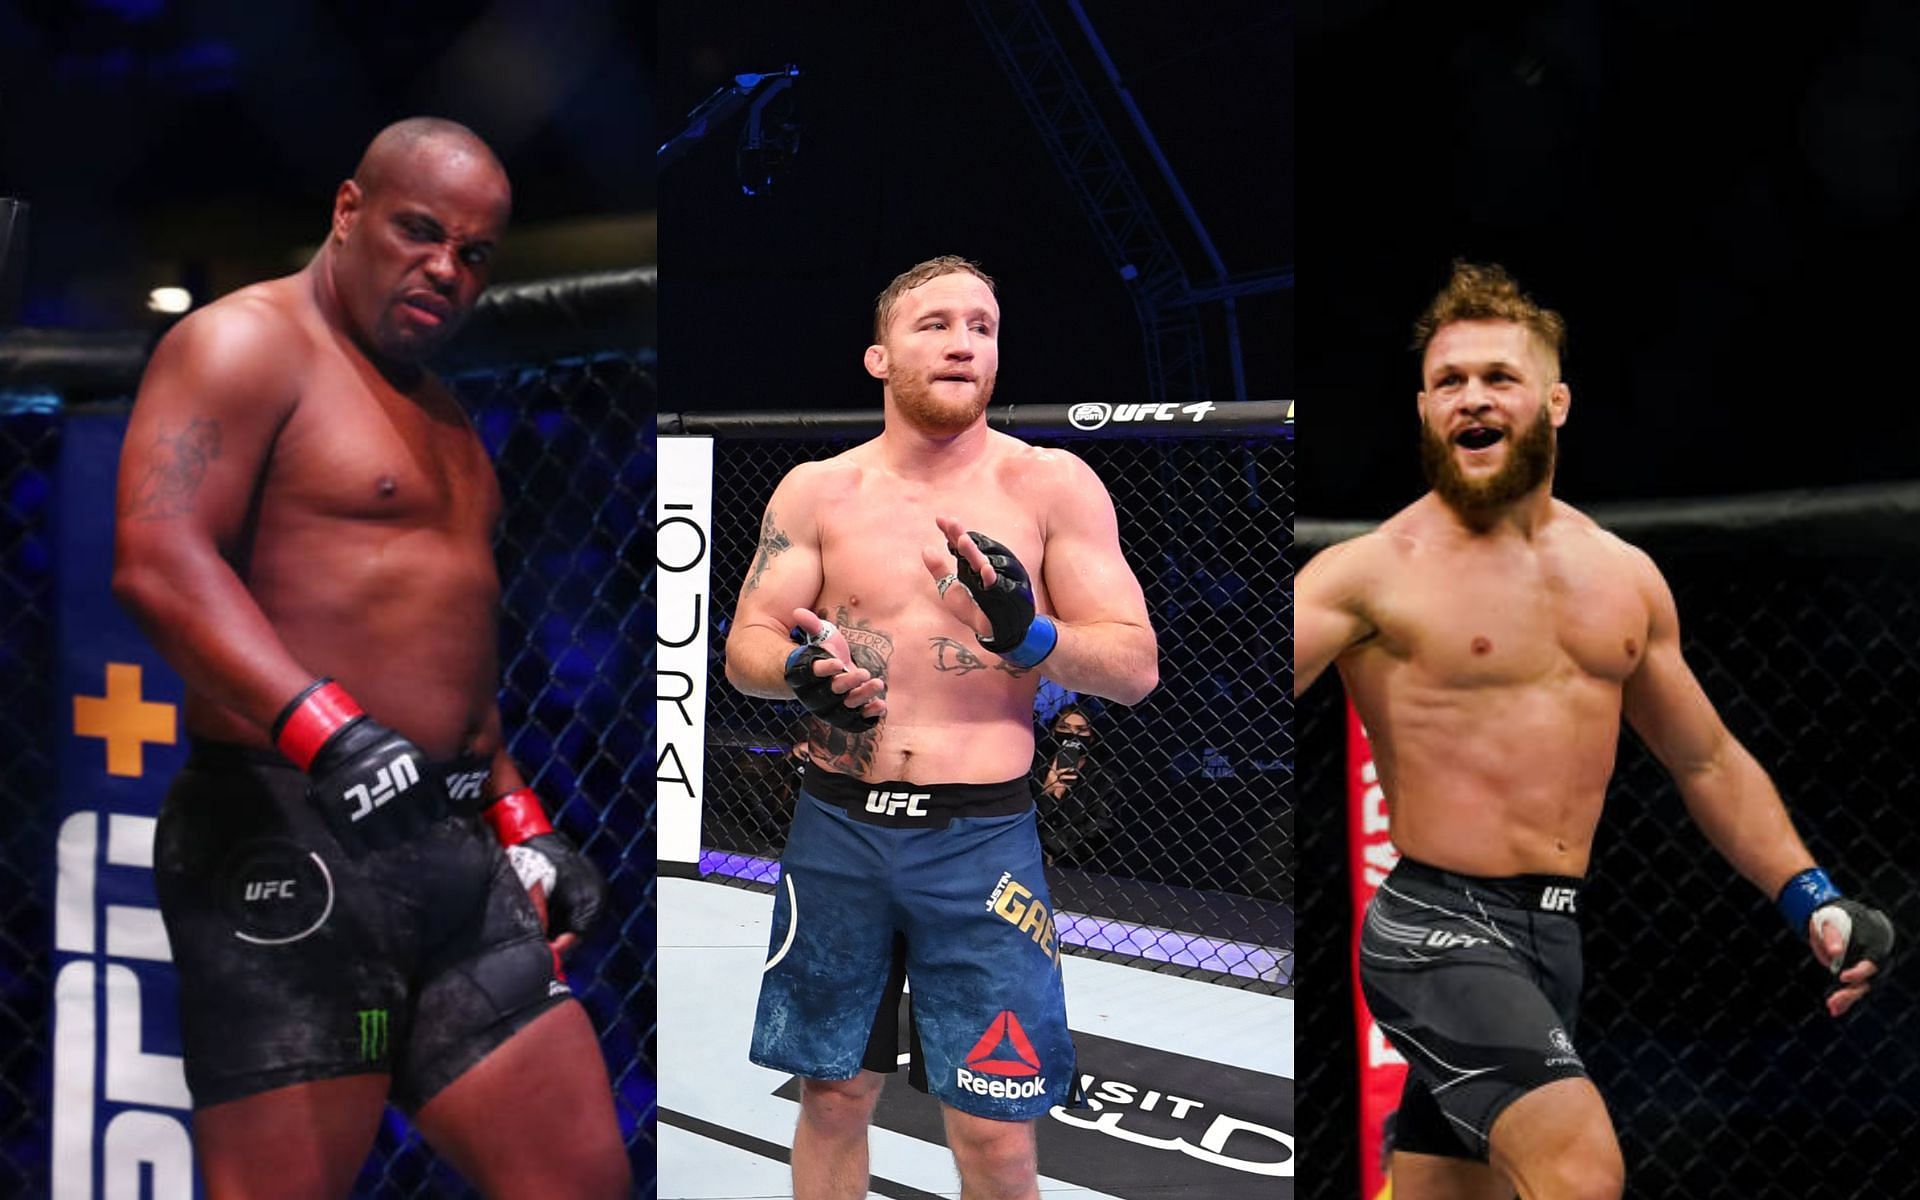 From left to right: Daniel Cormier, Justin Gaethje, Rafael Fiziev